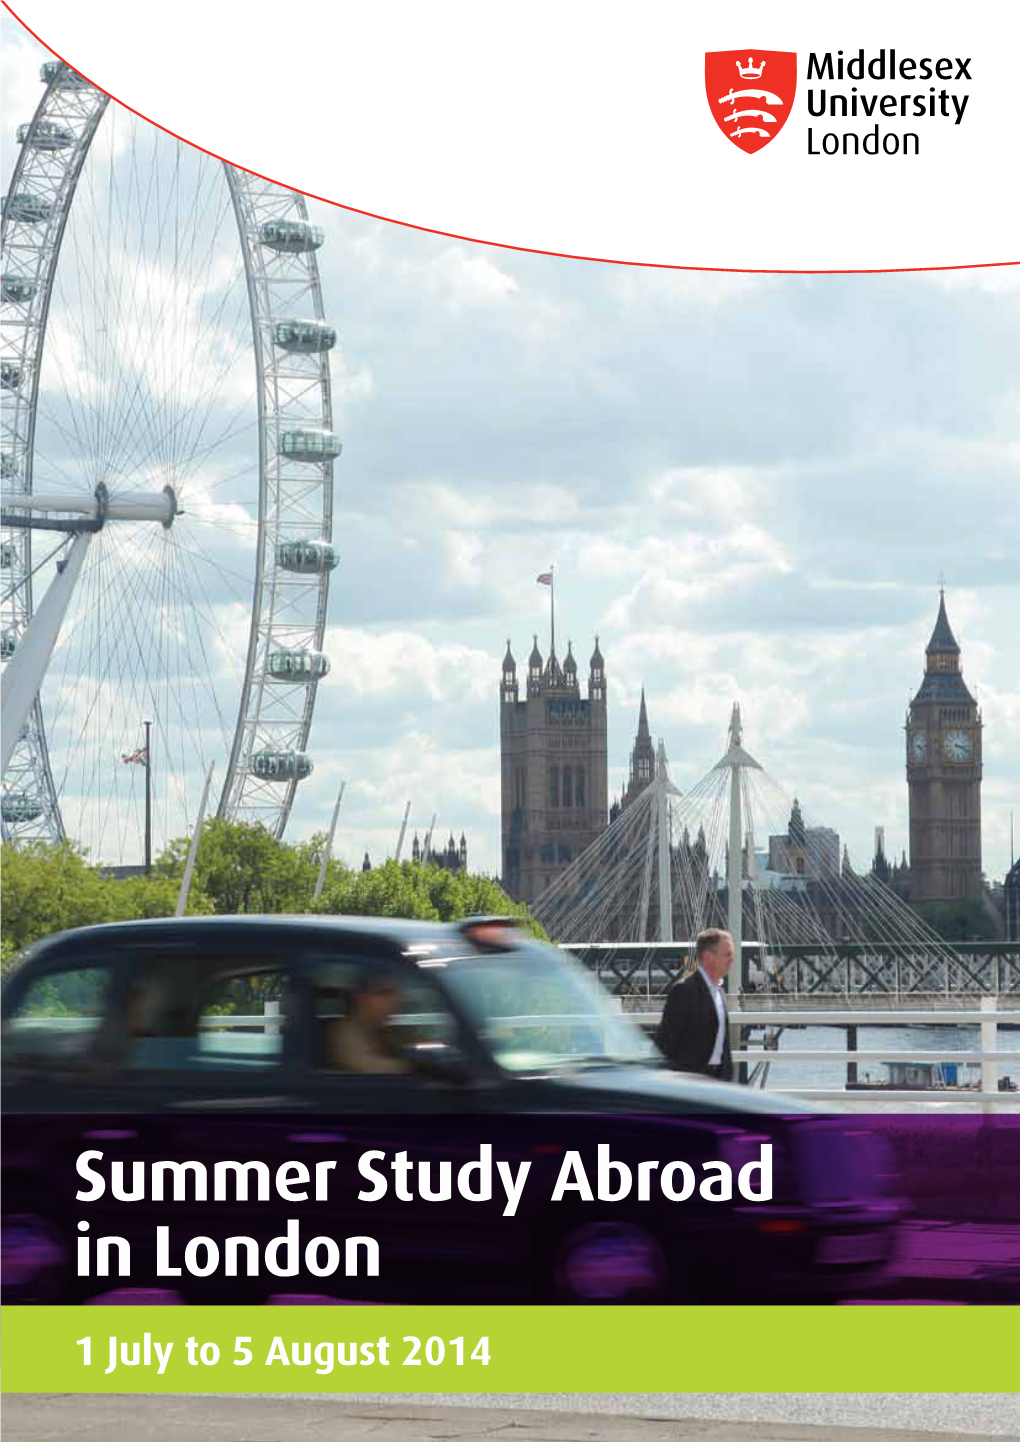 Summer Study Abroad in London 1 July to 5 August 2014 Why Middlesex?